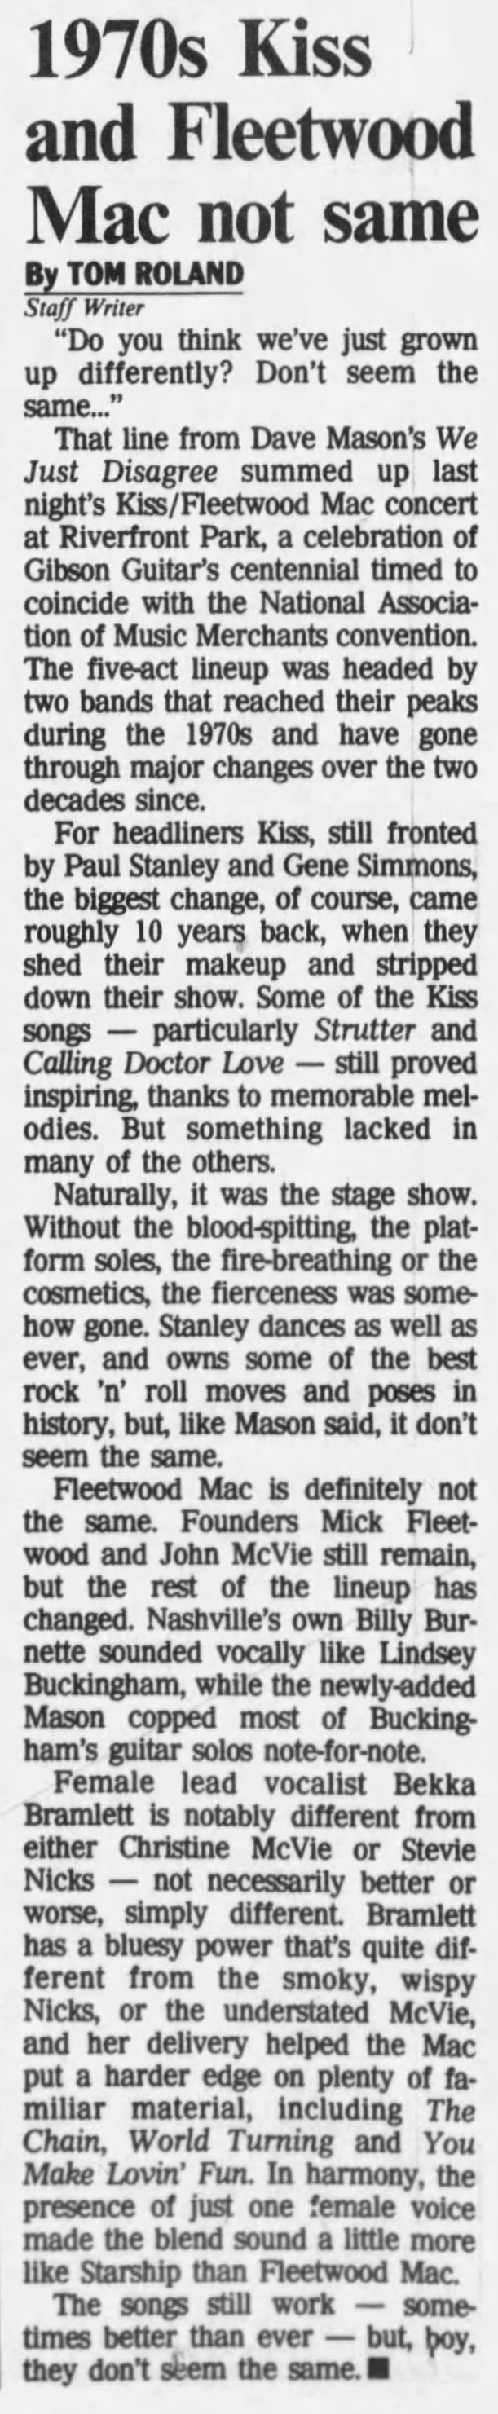 Review from Nashville, TN, USA 30 July 1994 show